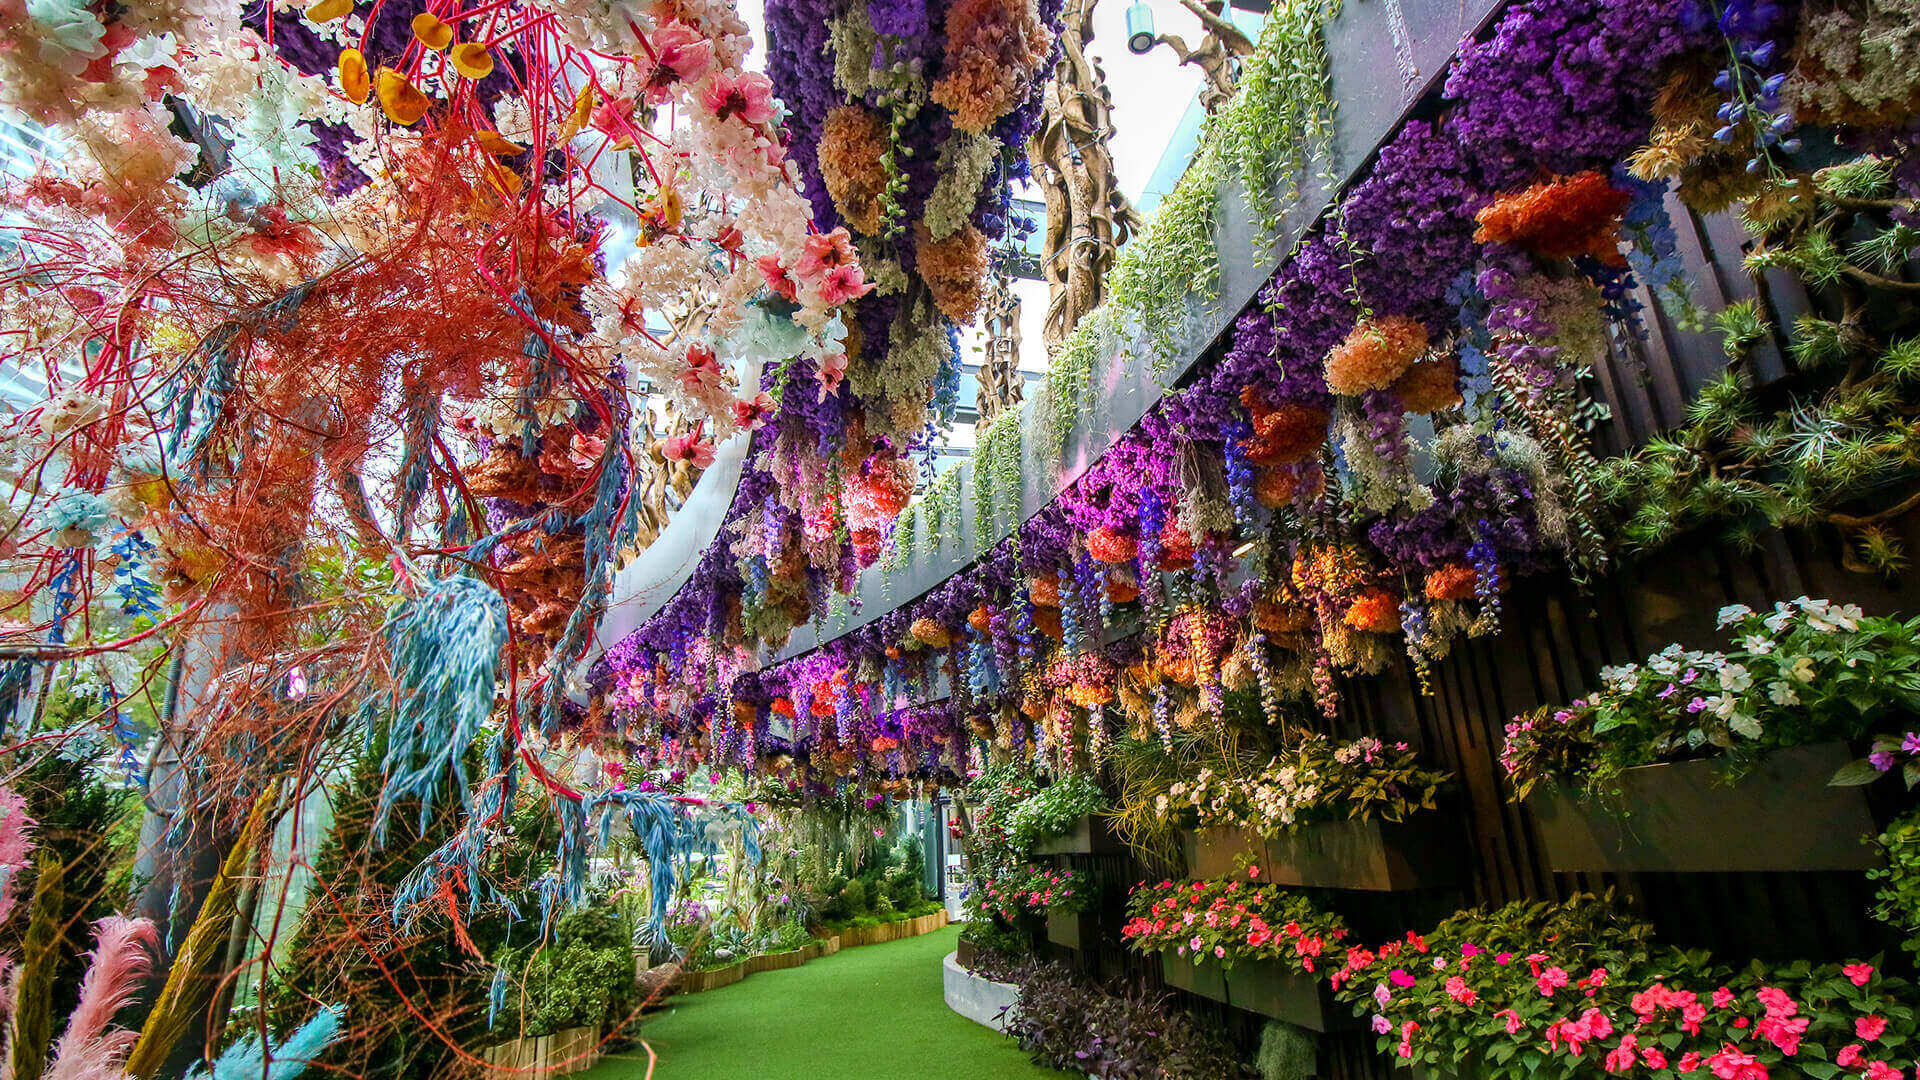 Floral Fantasy experience at Gardens by the Bay